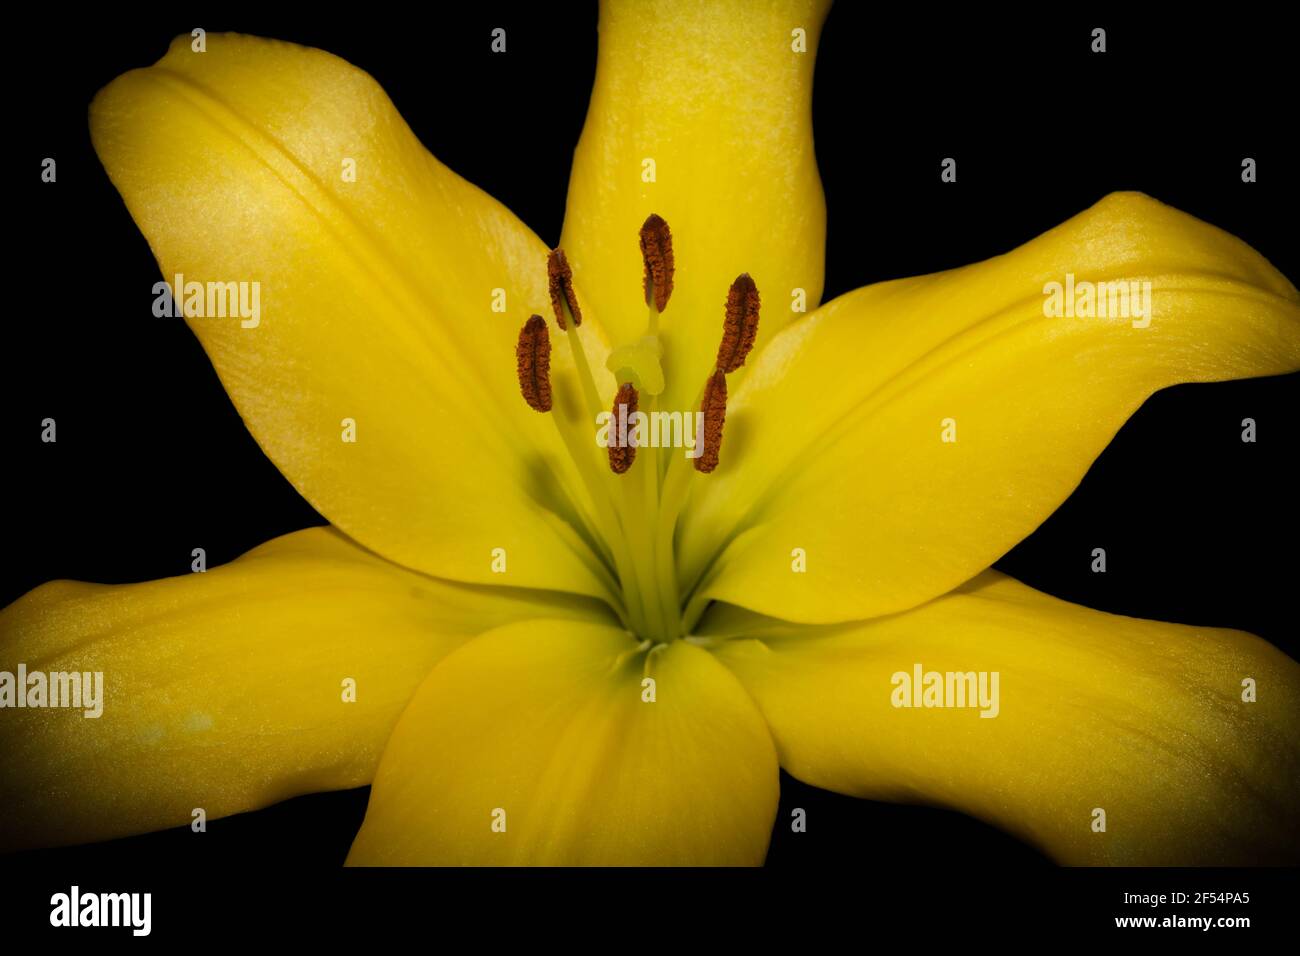 in focus Close up of Yellow Lily in bloom opened up on black background fresh scent and pollen can be seen on six buds, poster, still life nature. Stock Photo